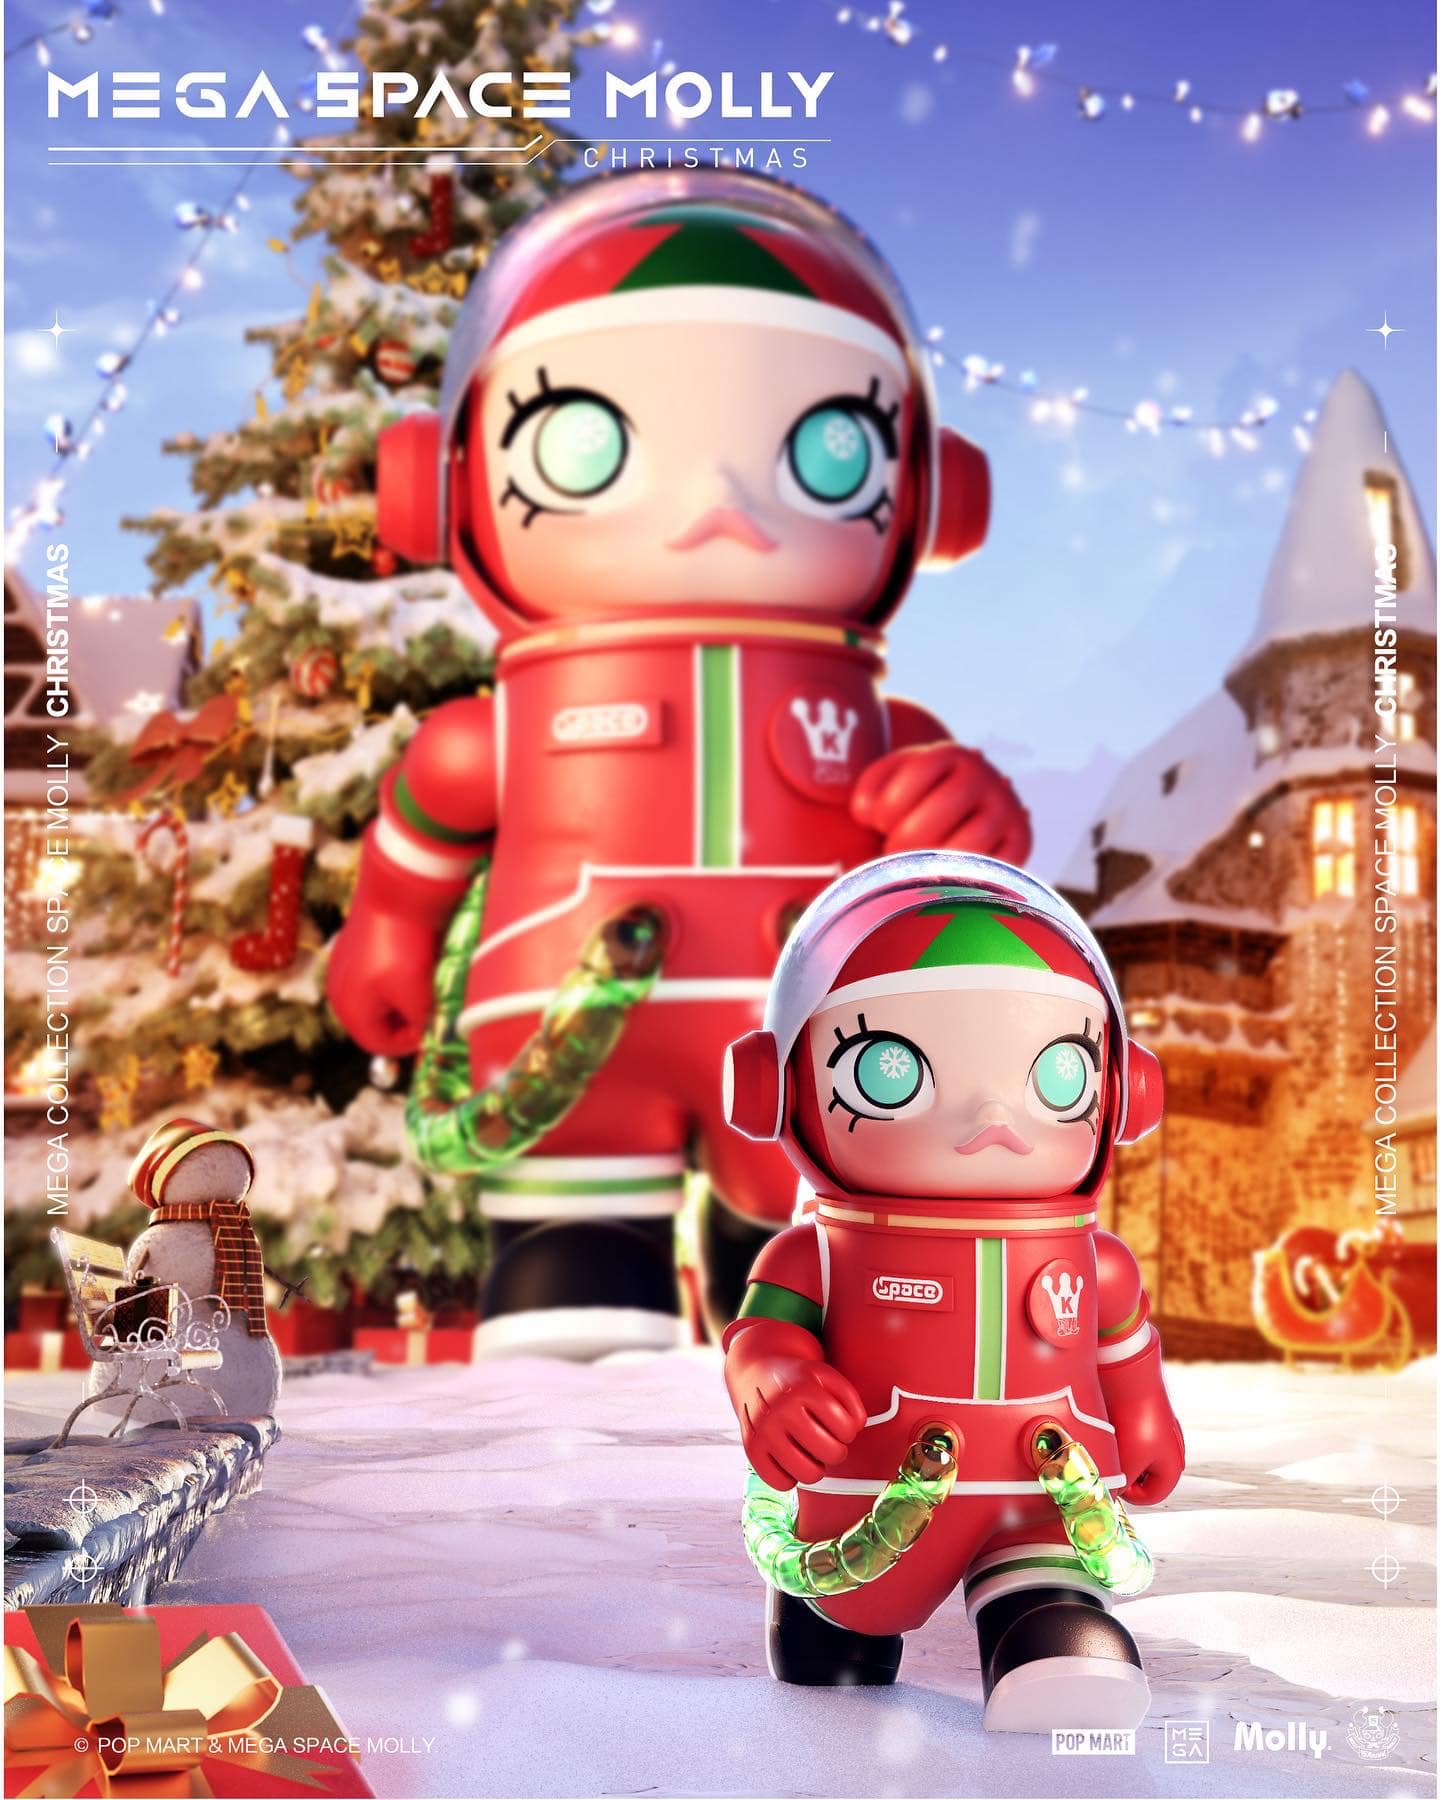 POP MART x Kenny Wong's Mega Space Molly: Christmas - The Toy